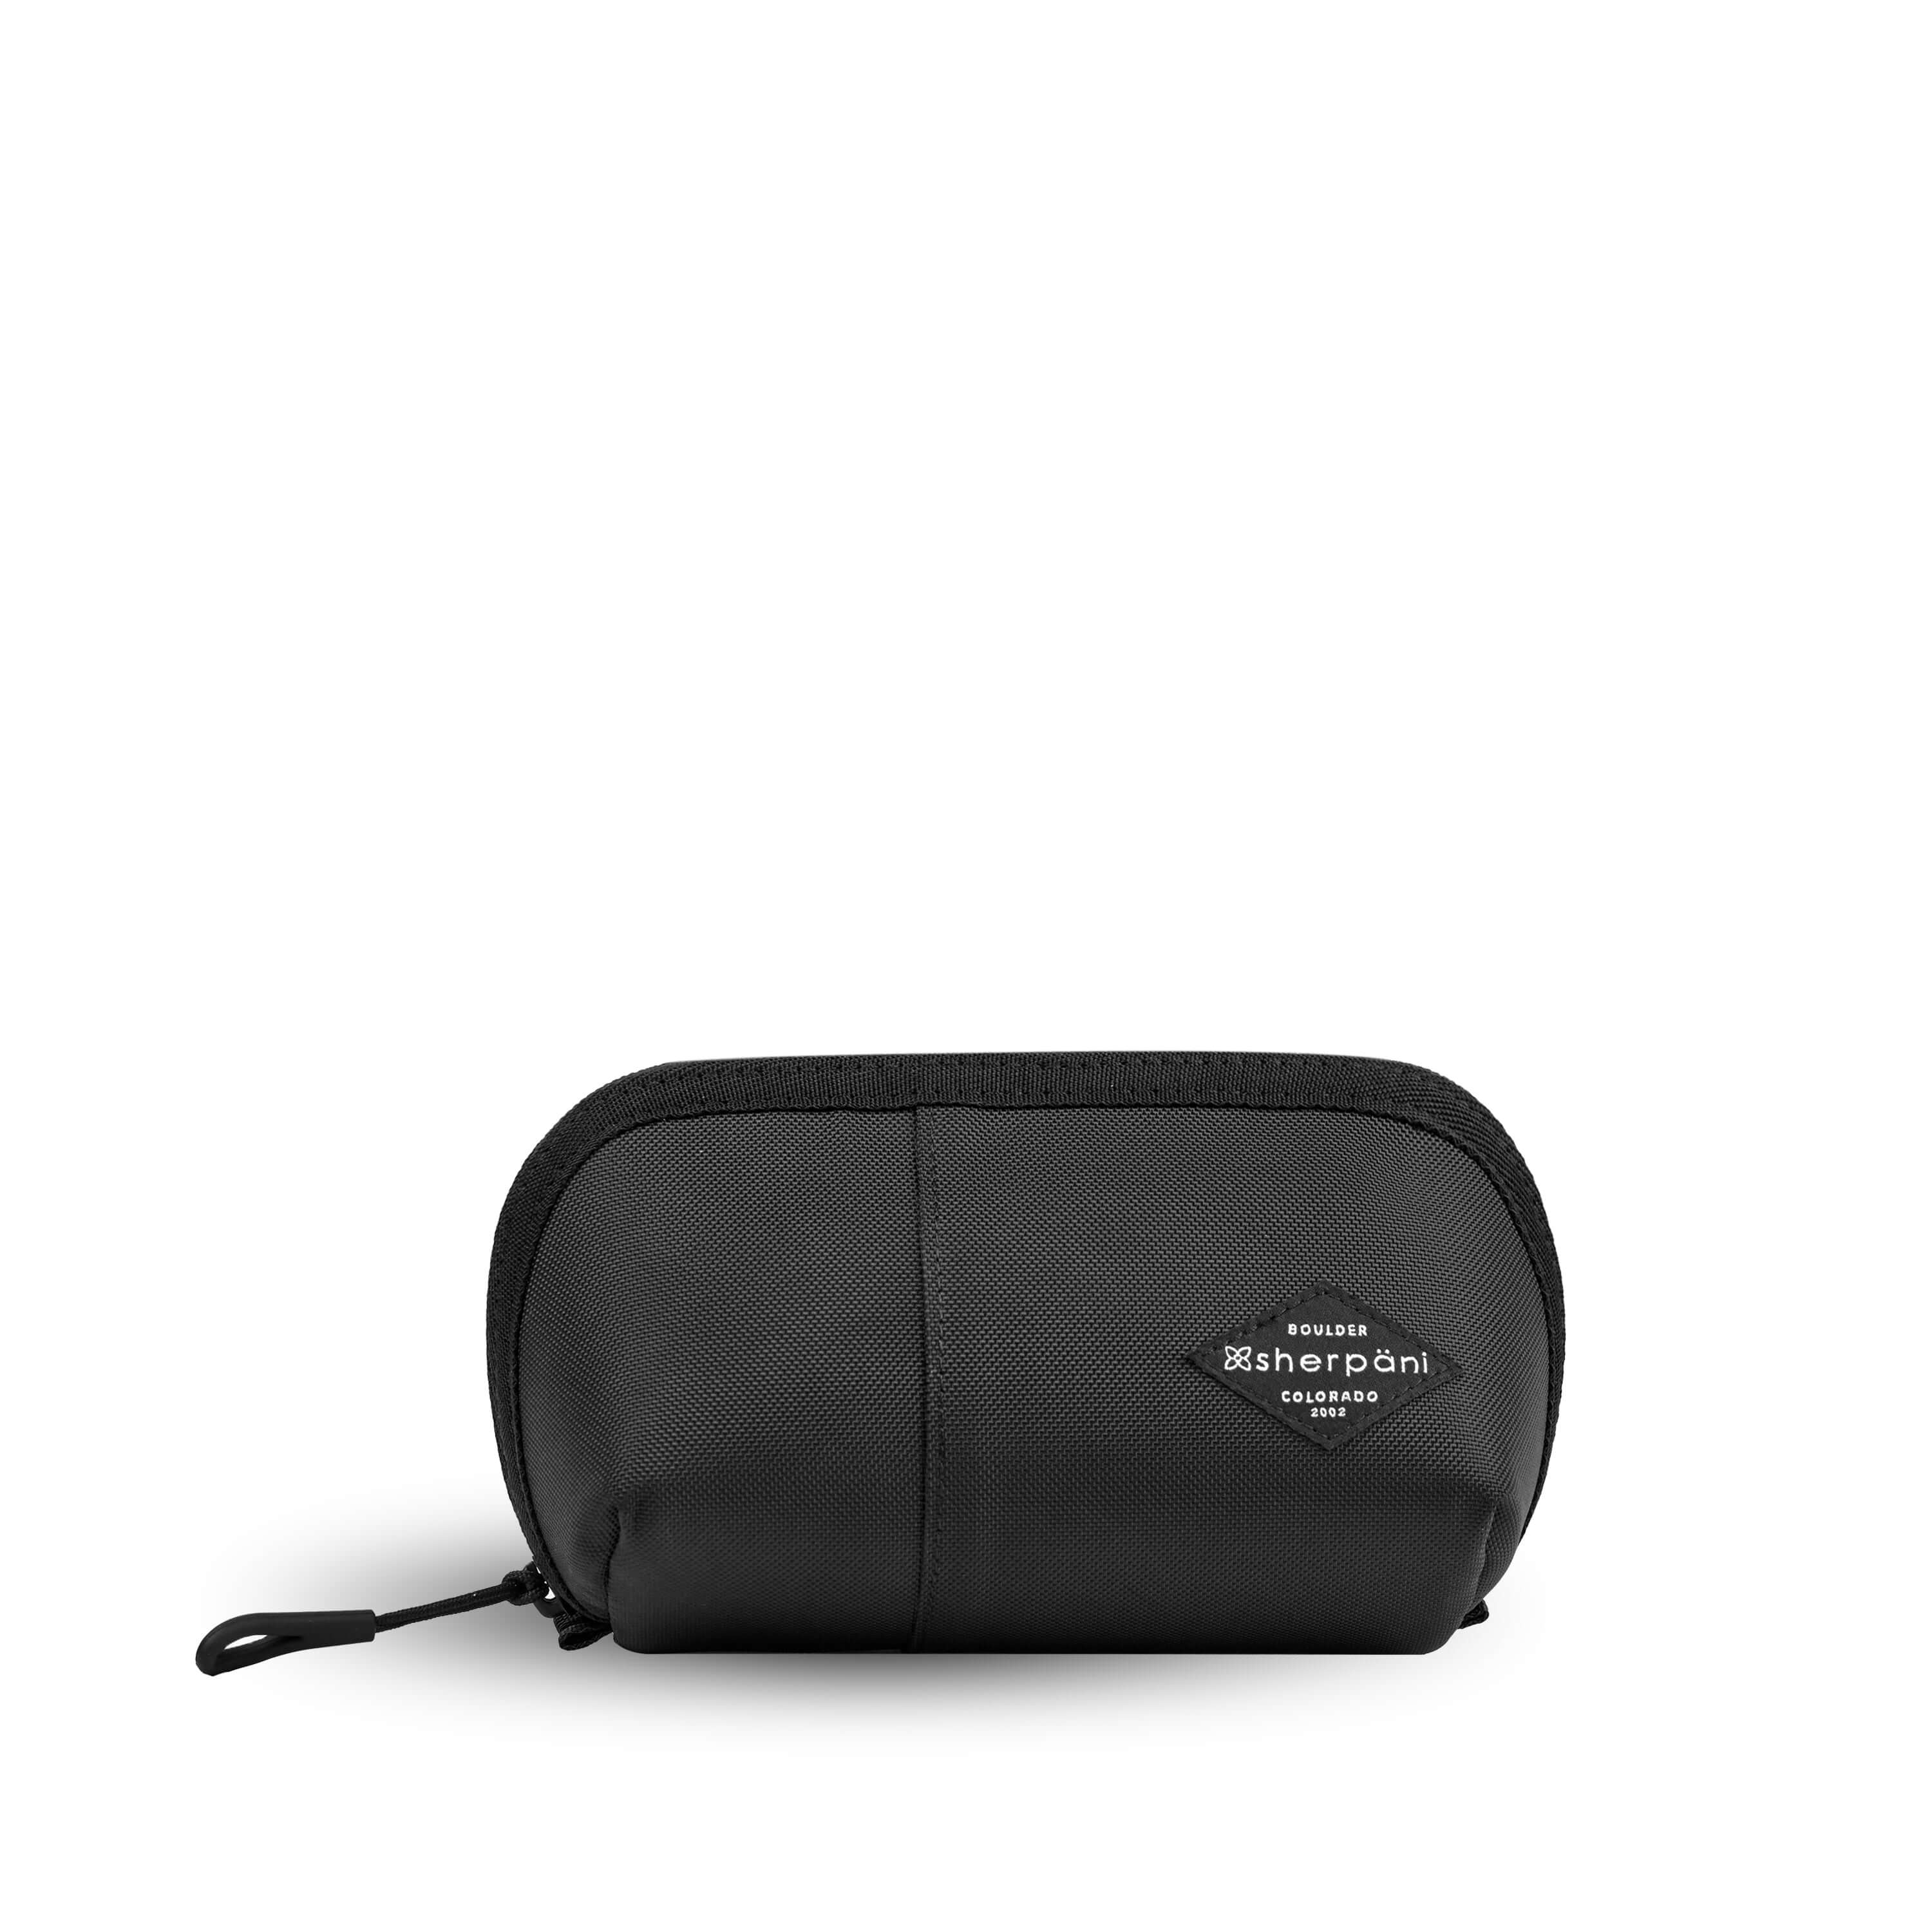 Flat front view of Sherpani travel accessory, the Harmony in Lavender. The pouch is entirely black. It has an easy-pull zipper that is accented in black.